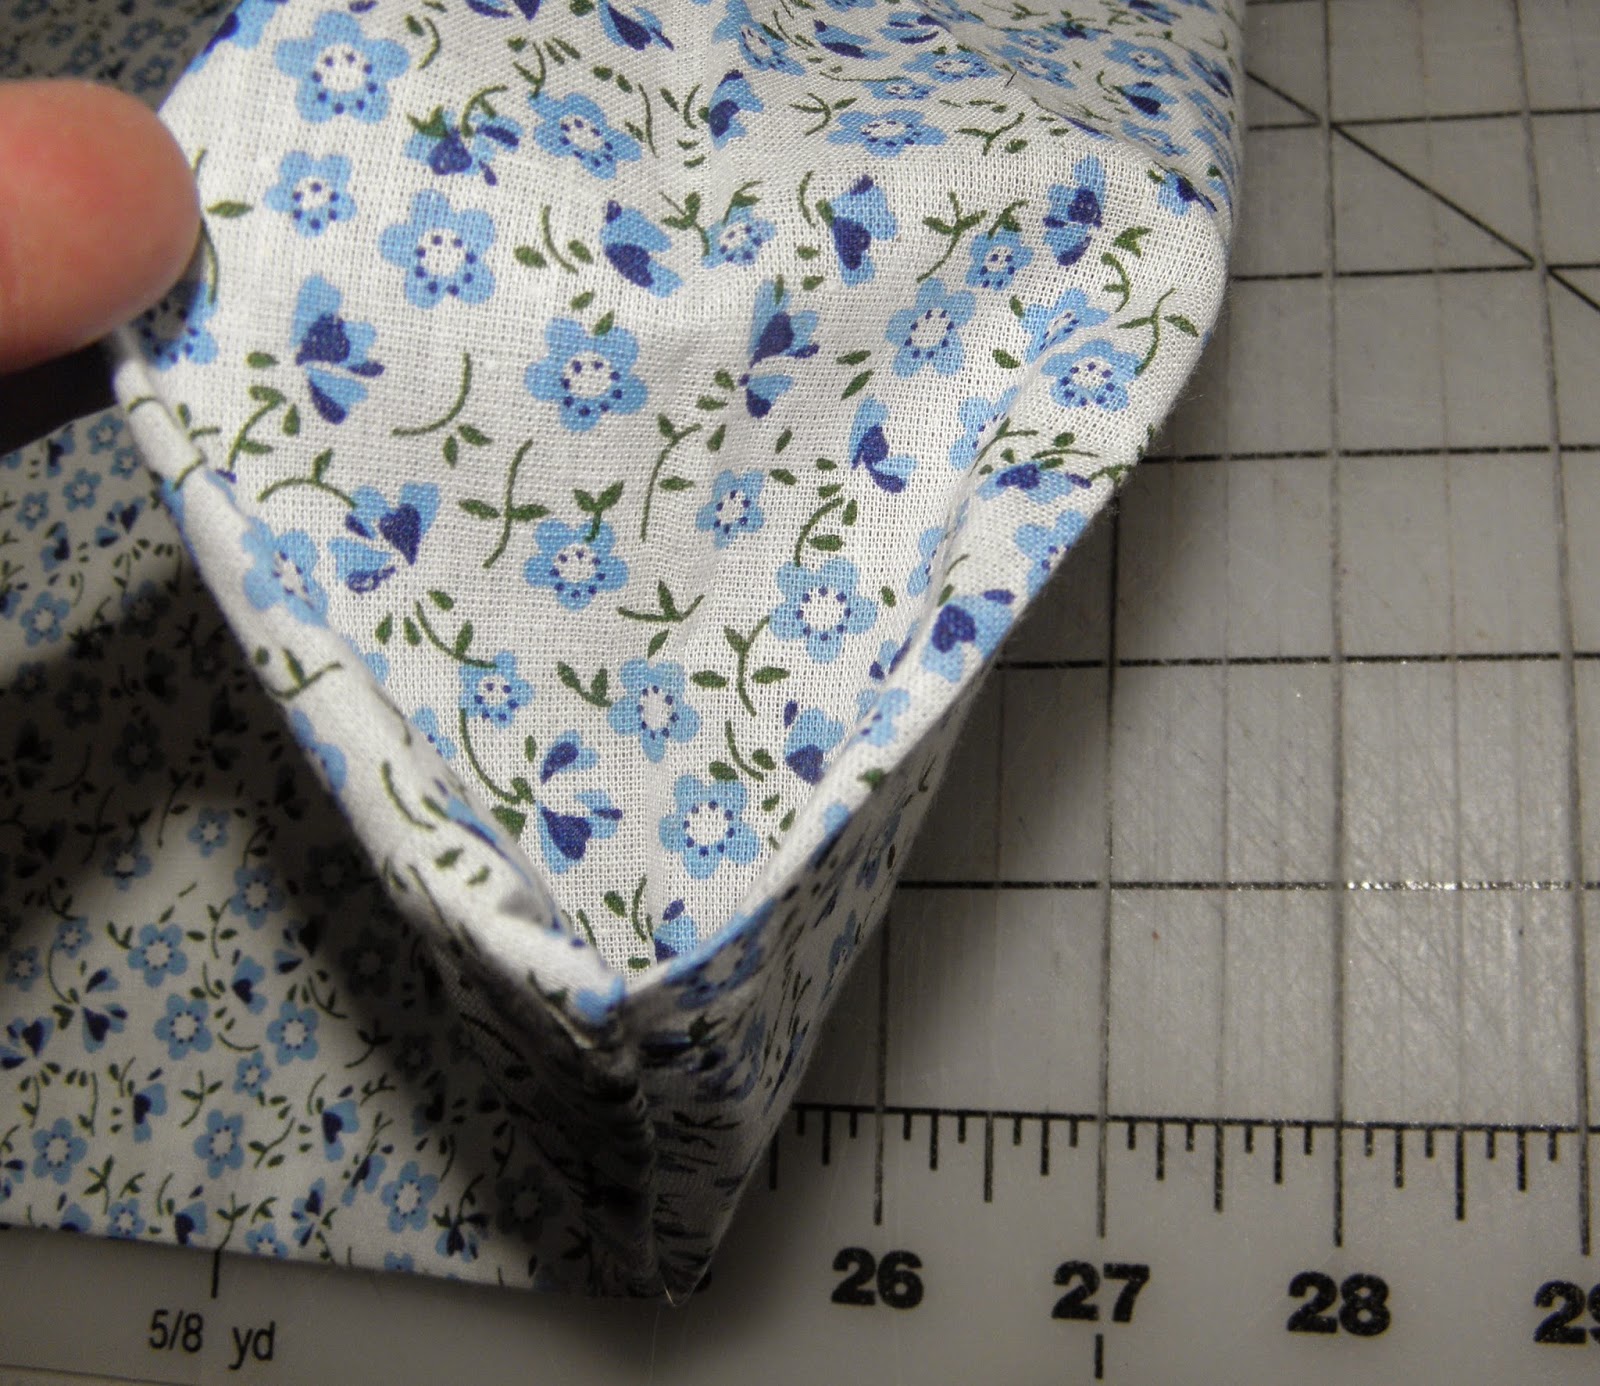 Adventurous Quilter: Tutorial for a simple straight stitch only ...